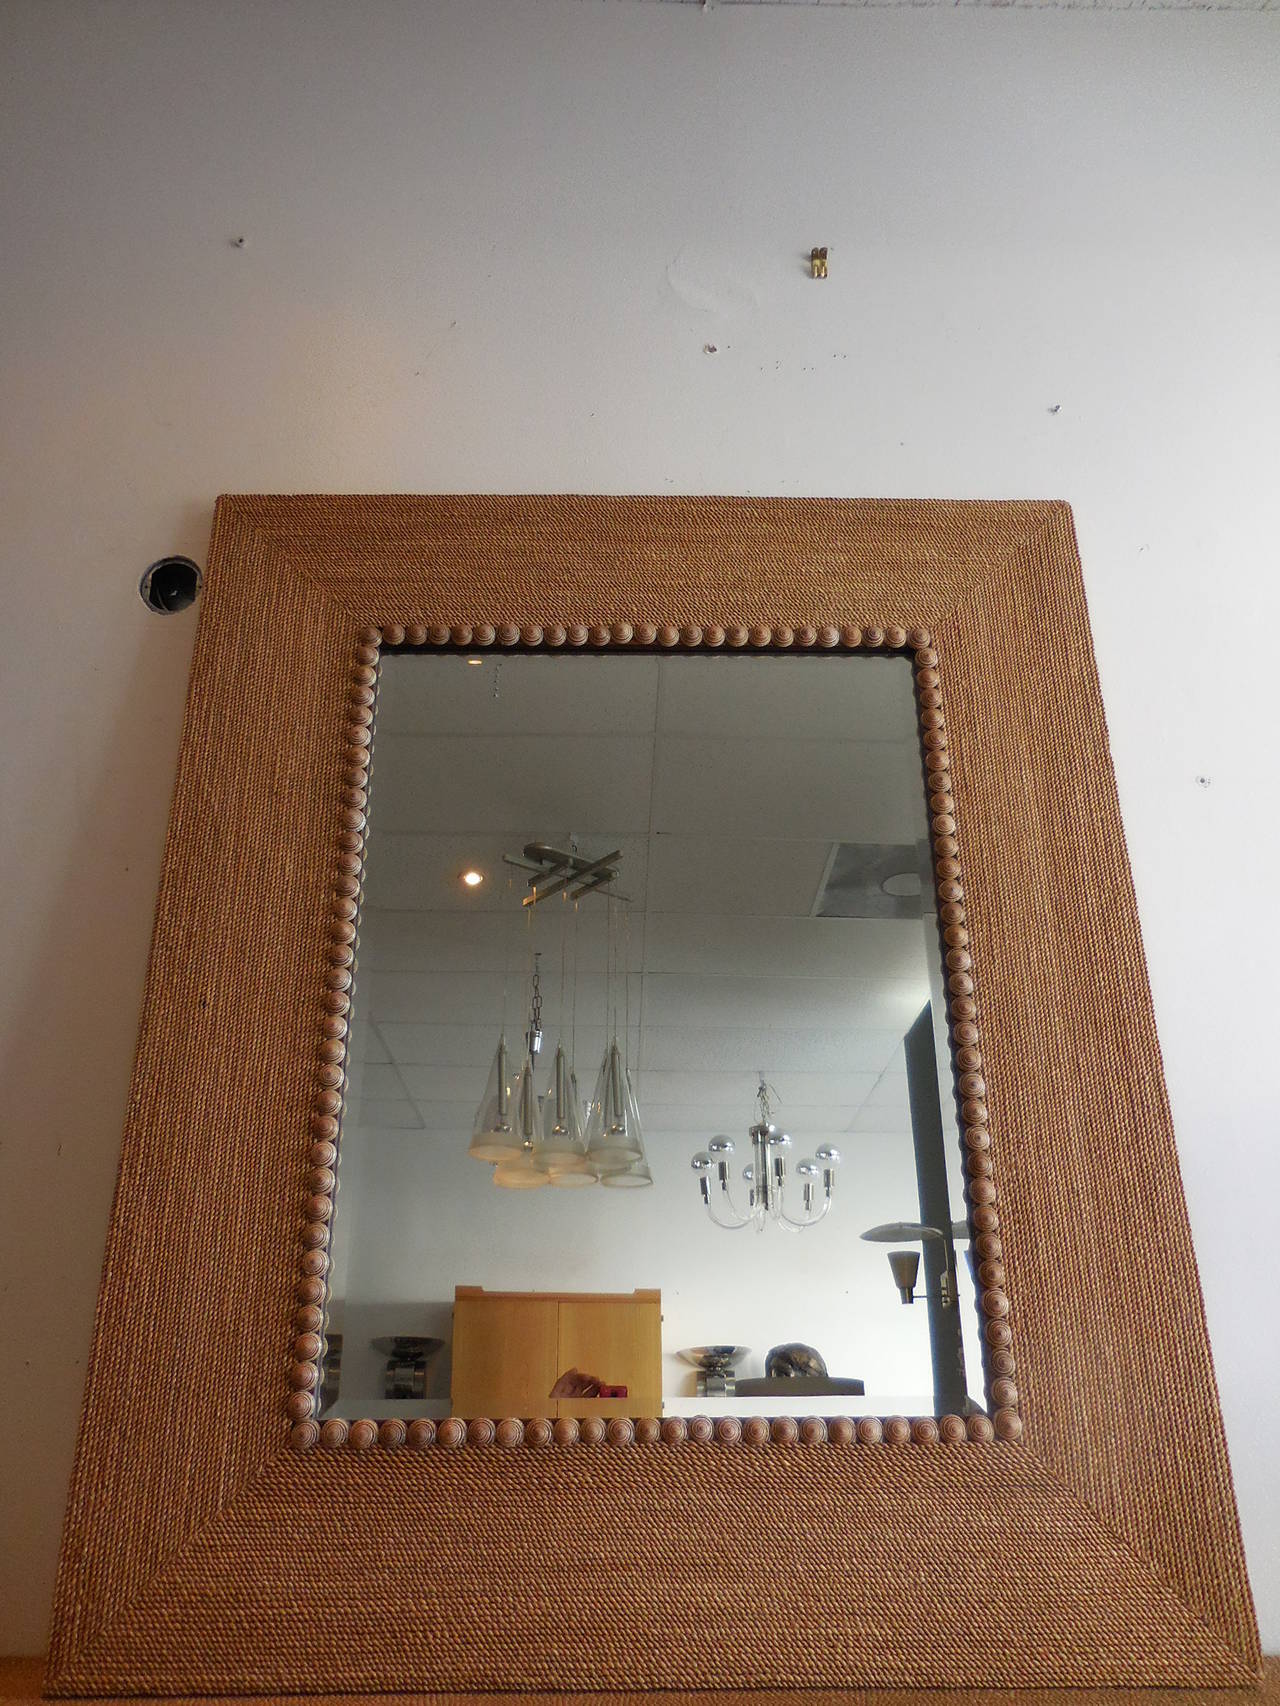 This is a large mirror, the frame is done in seaweed rope and accented with shells around the inset beveled mirror.